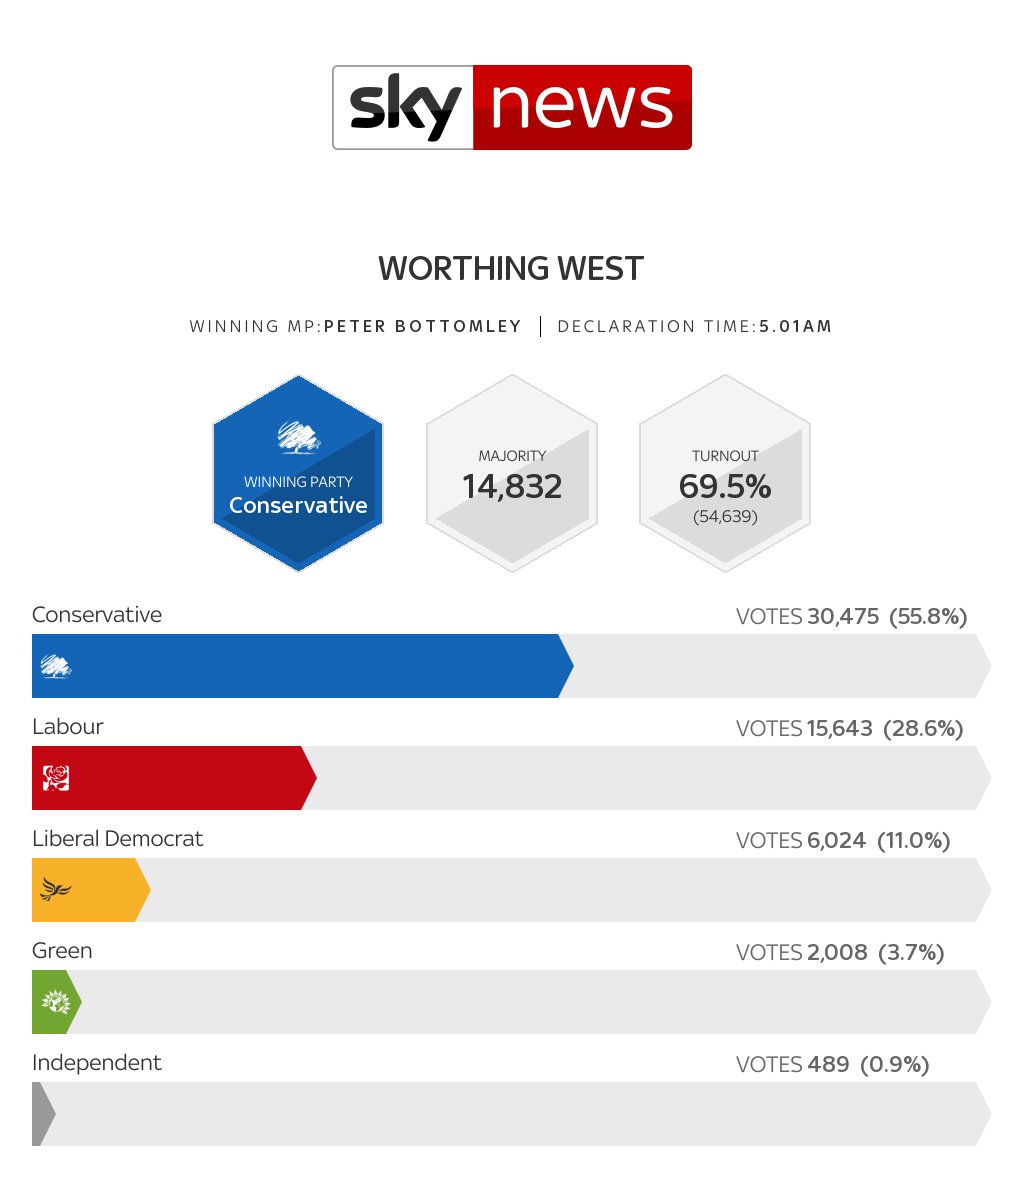 Full election result for #WorthingWest election.news.sky.com/snap-general-e… #GE2019